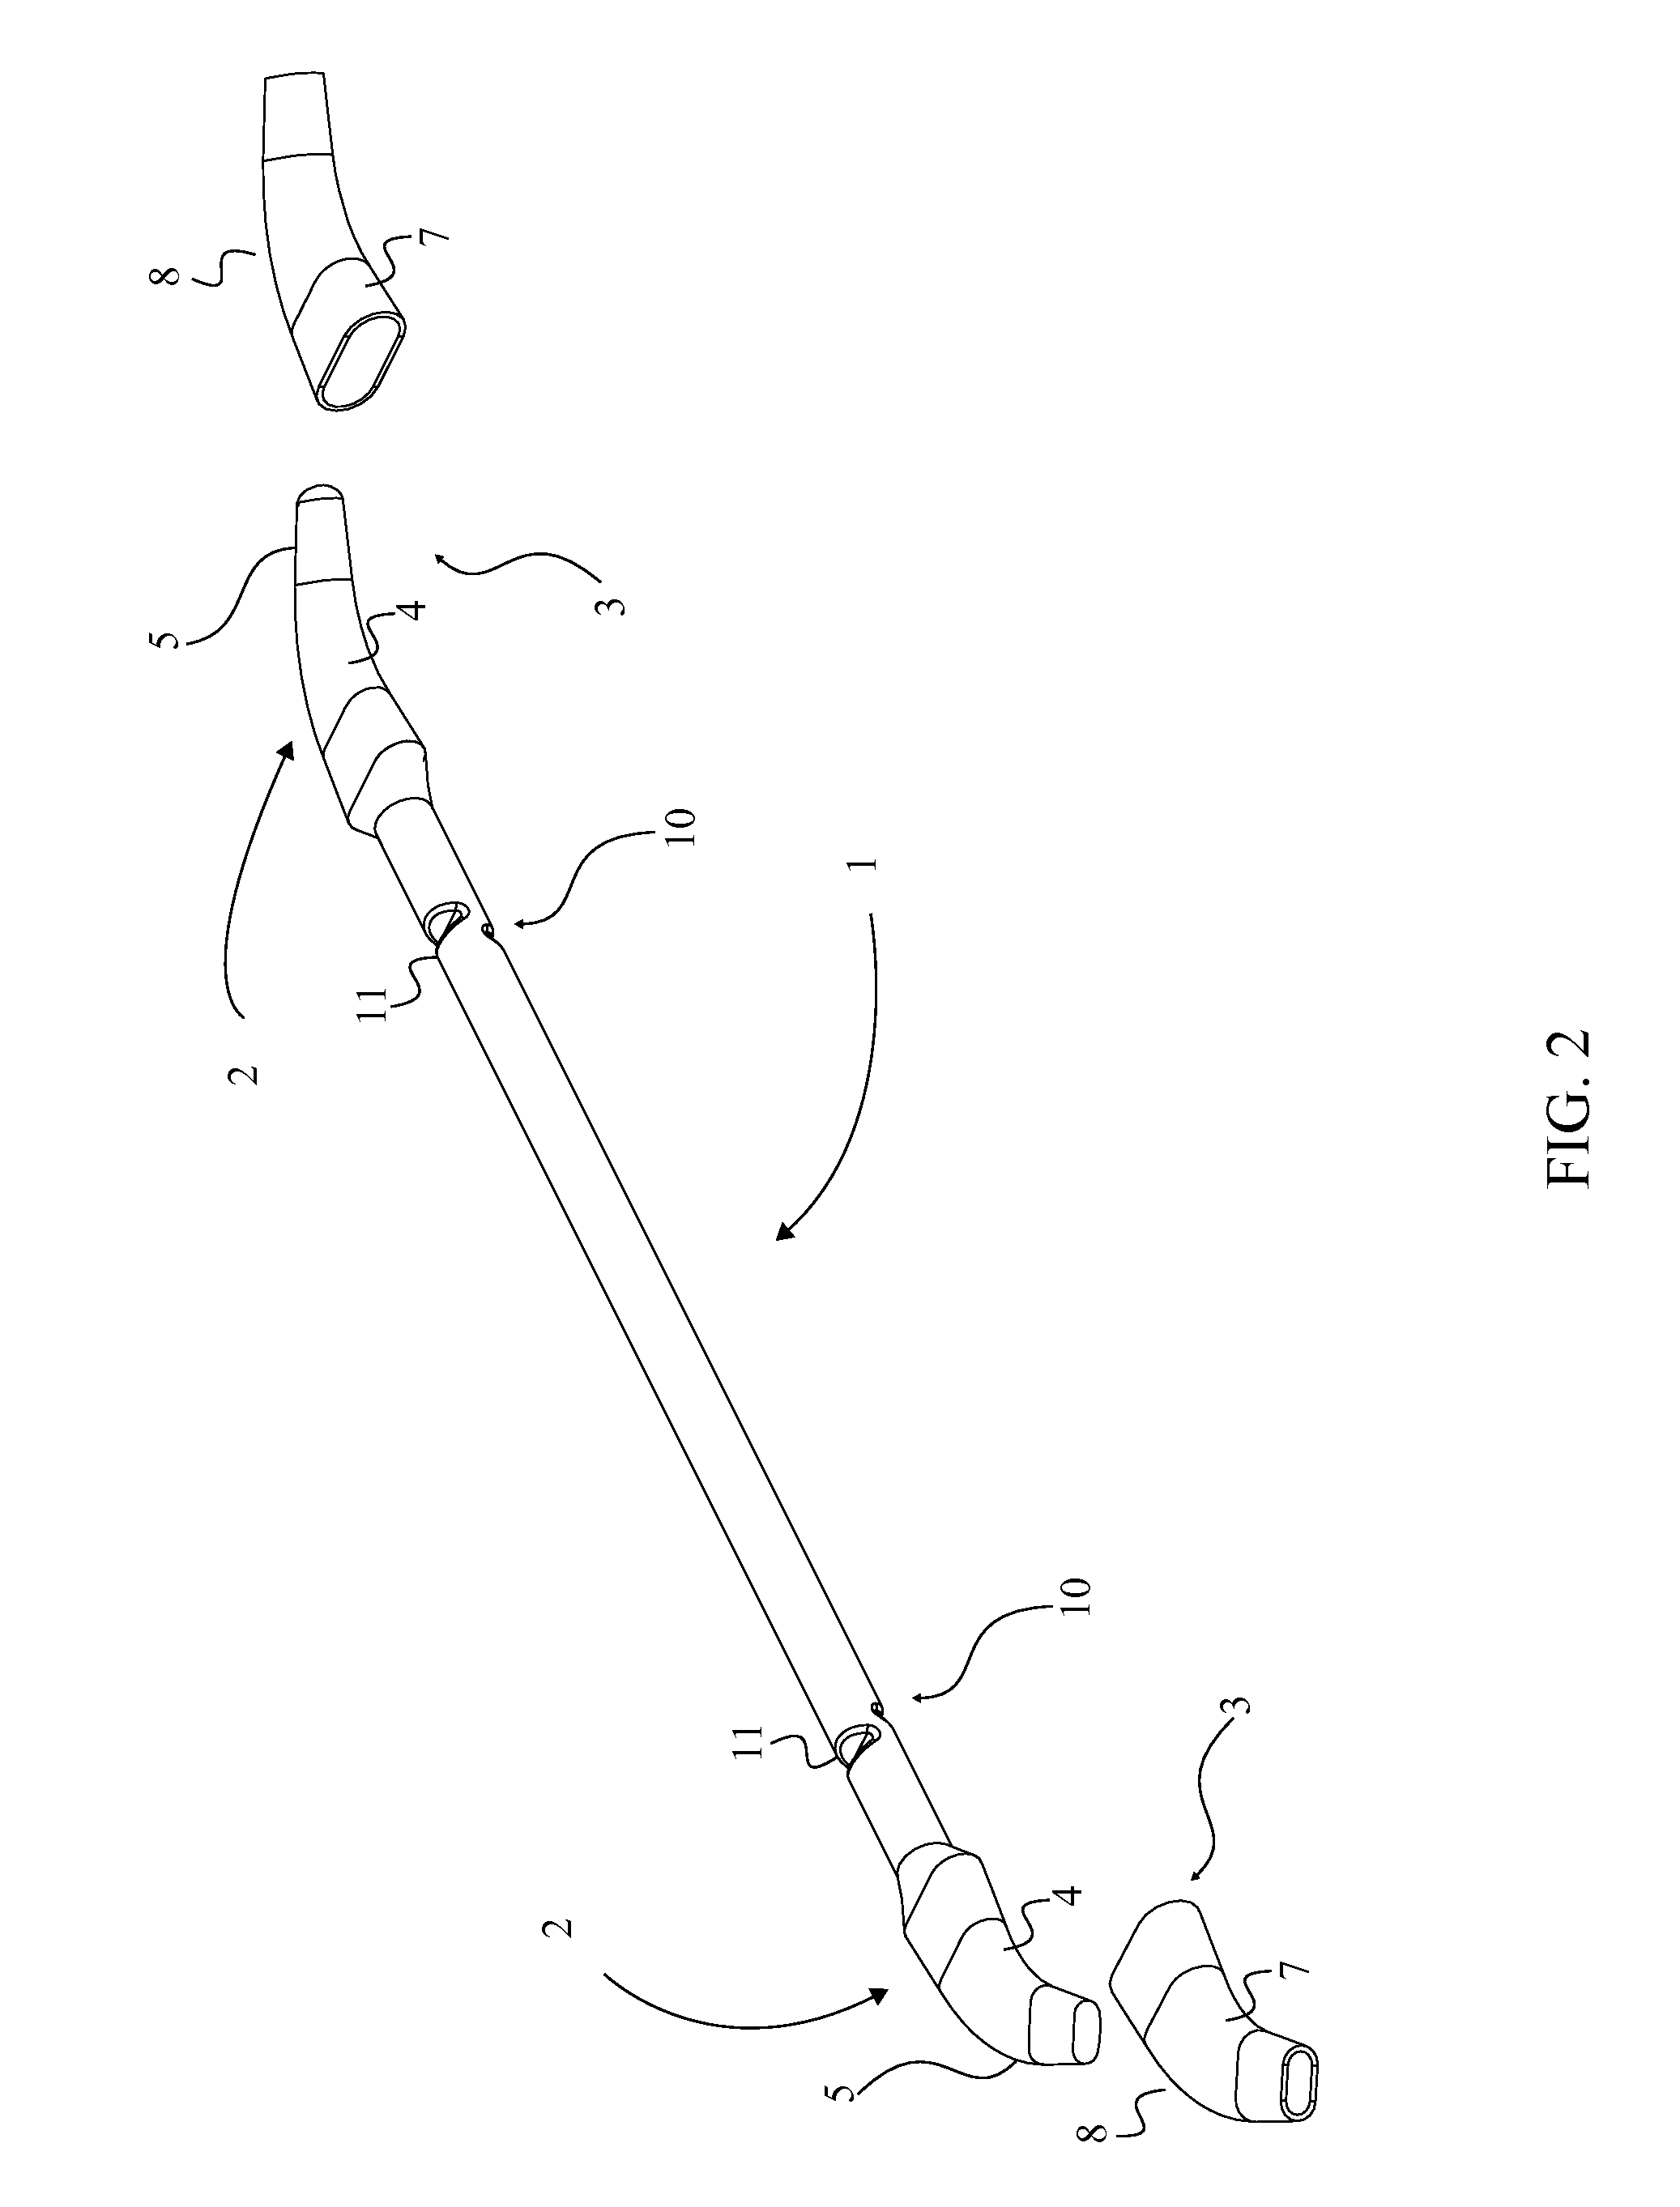 Disposable Hair Removal Apparatus for Nose, Ears, and Small Orifices